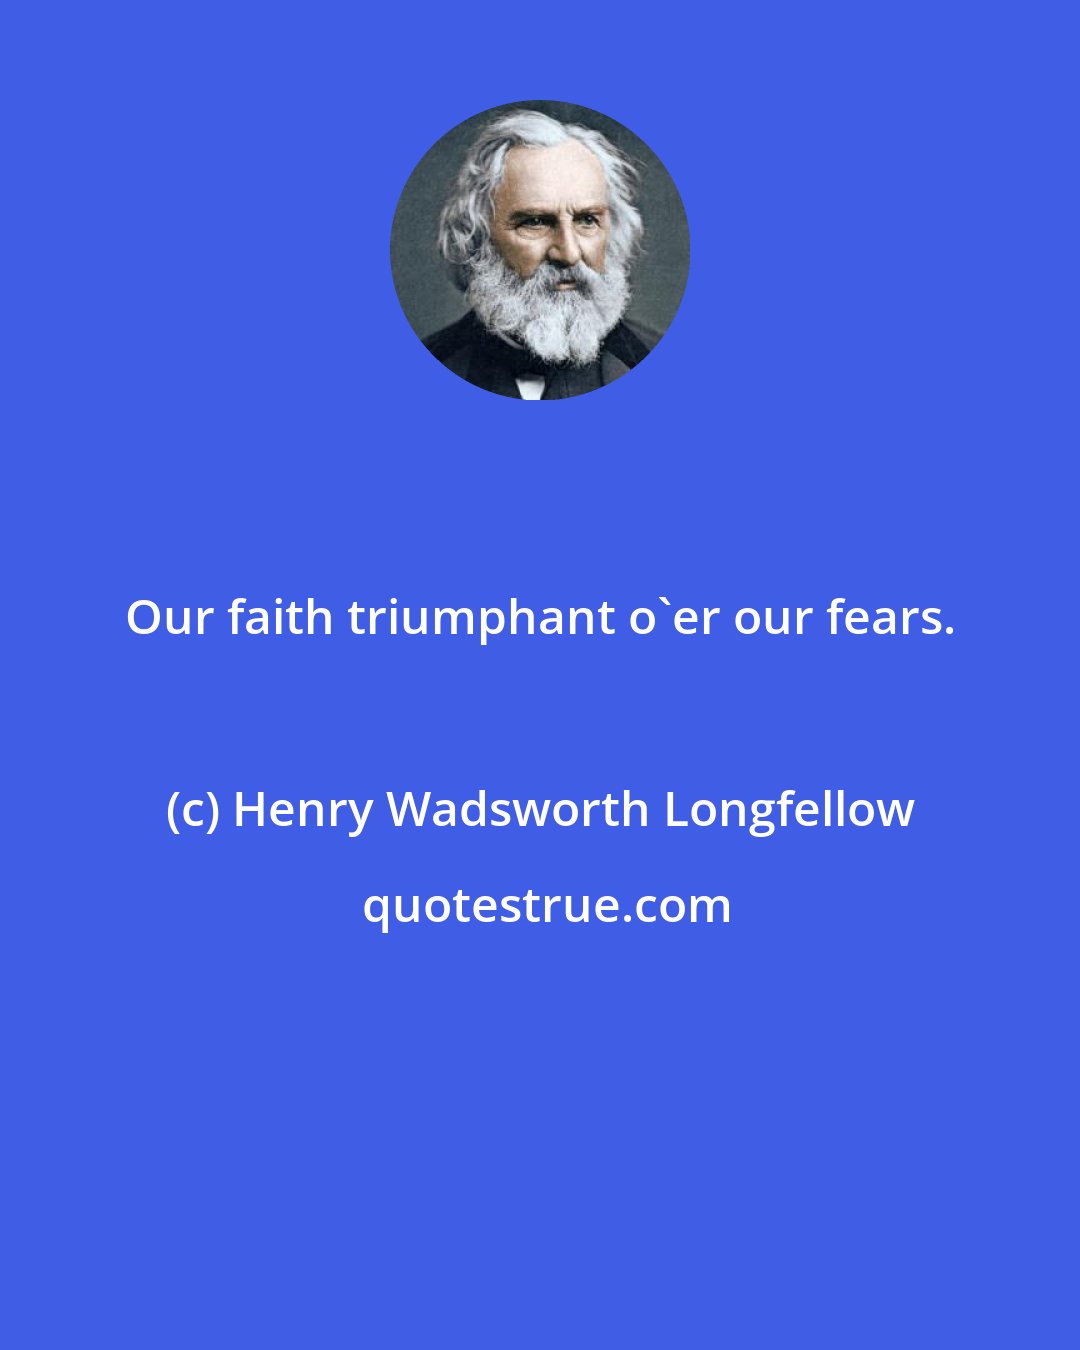 Henry Wadsworth Longfellow: Our faith triumphant o'er our fears.